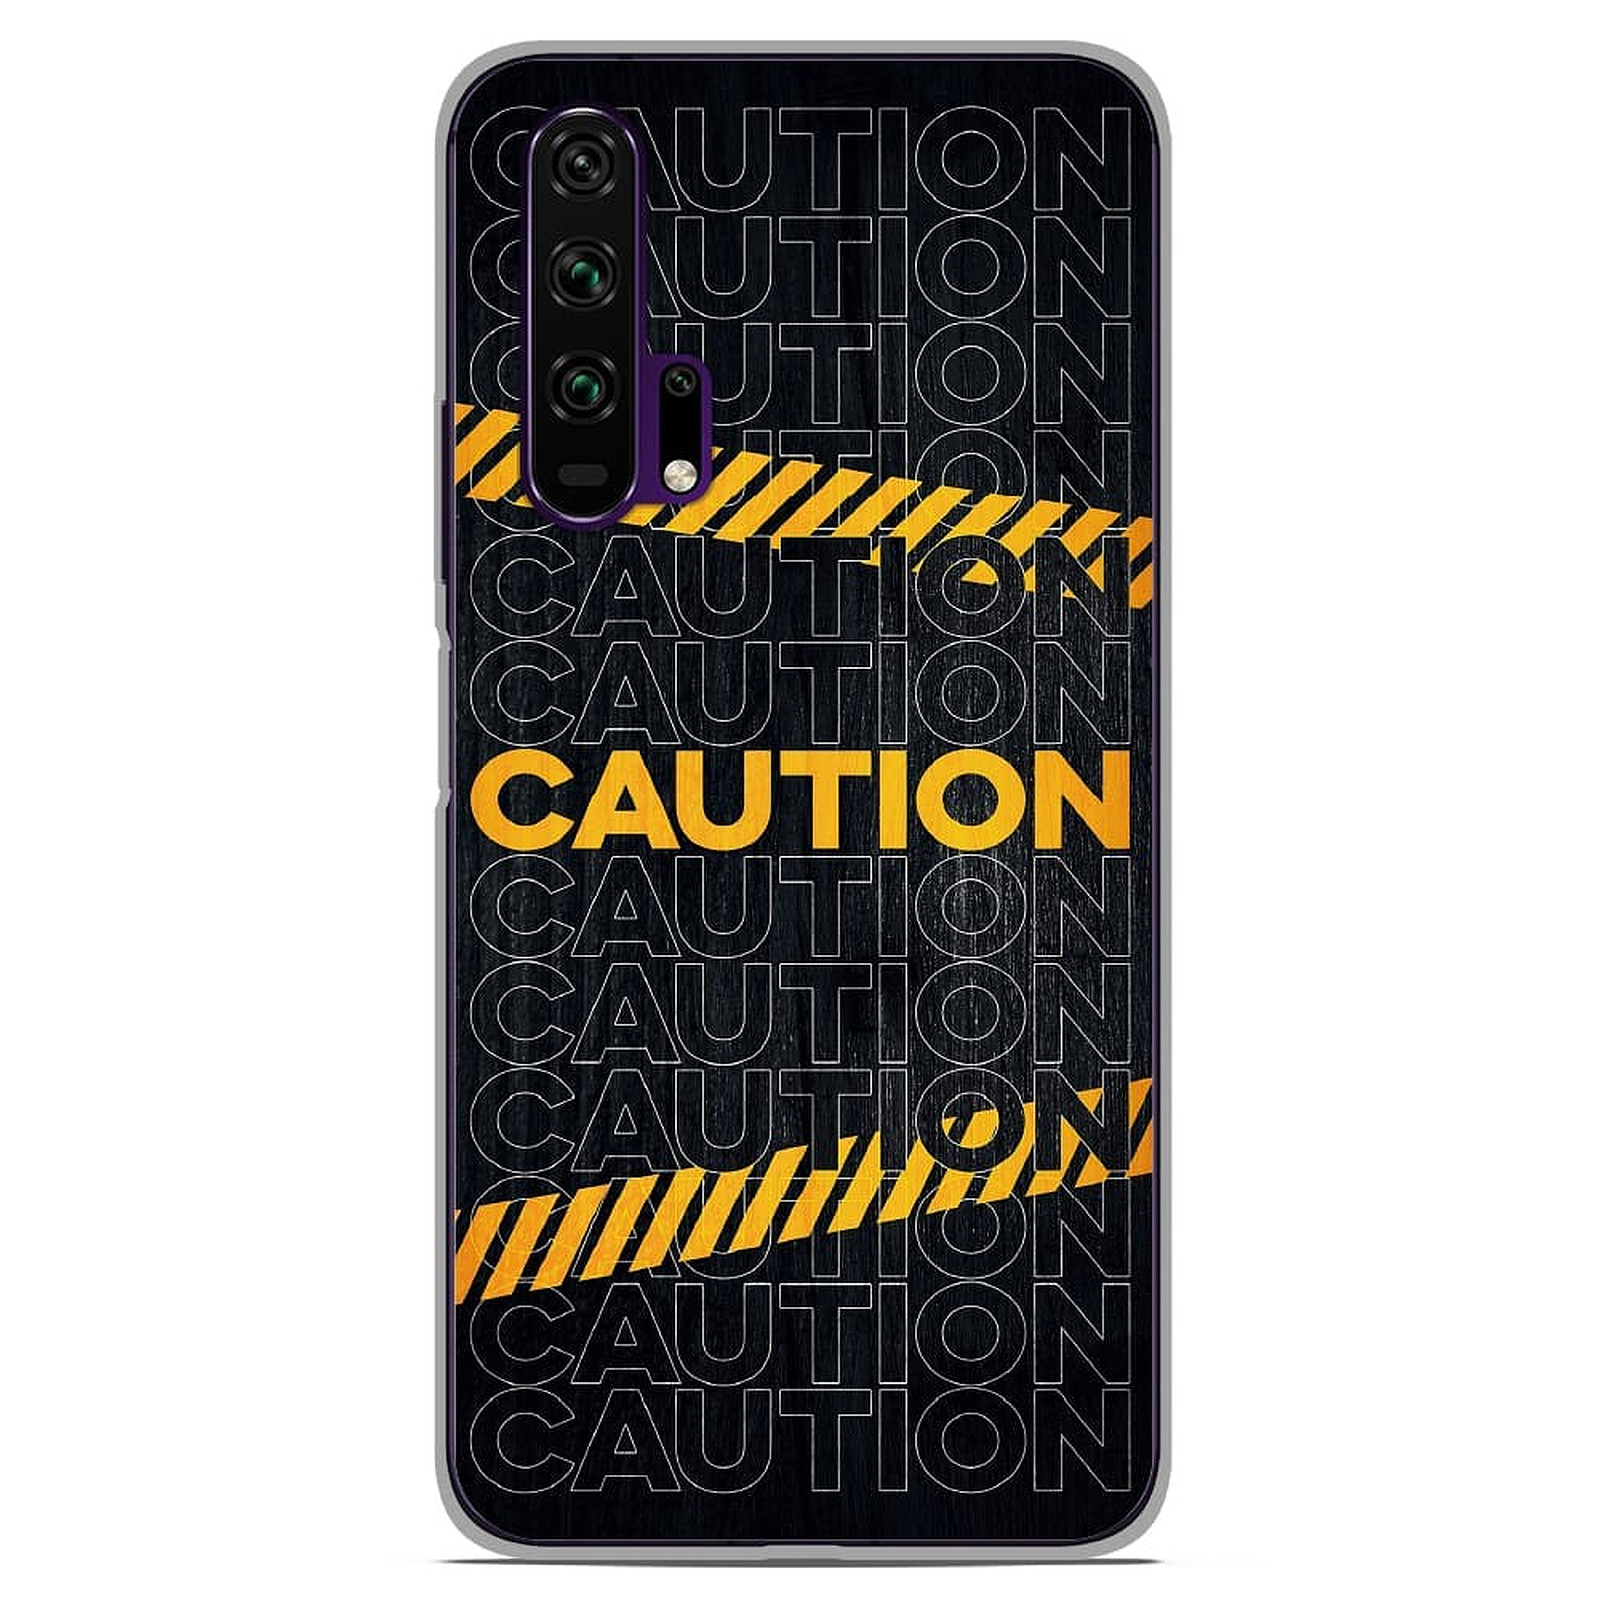 1001 Coques Coque silicone gel Huawei Honor 20 Pro motif Caution - Coque telephone 1001Coques